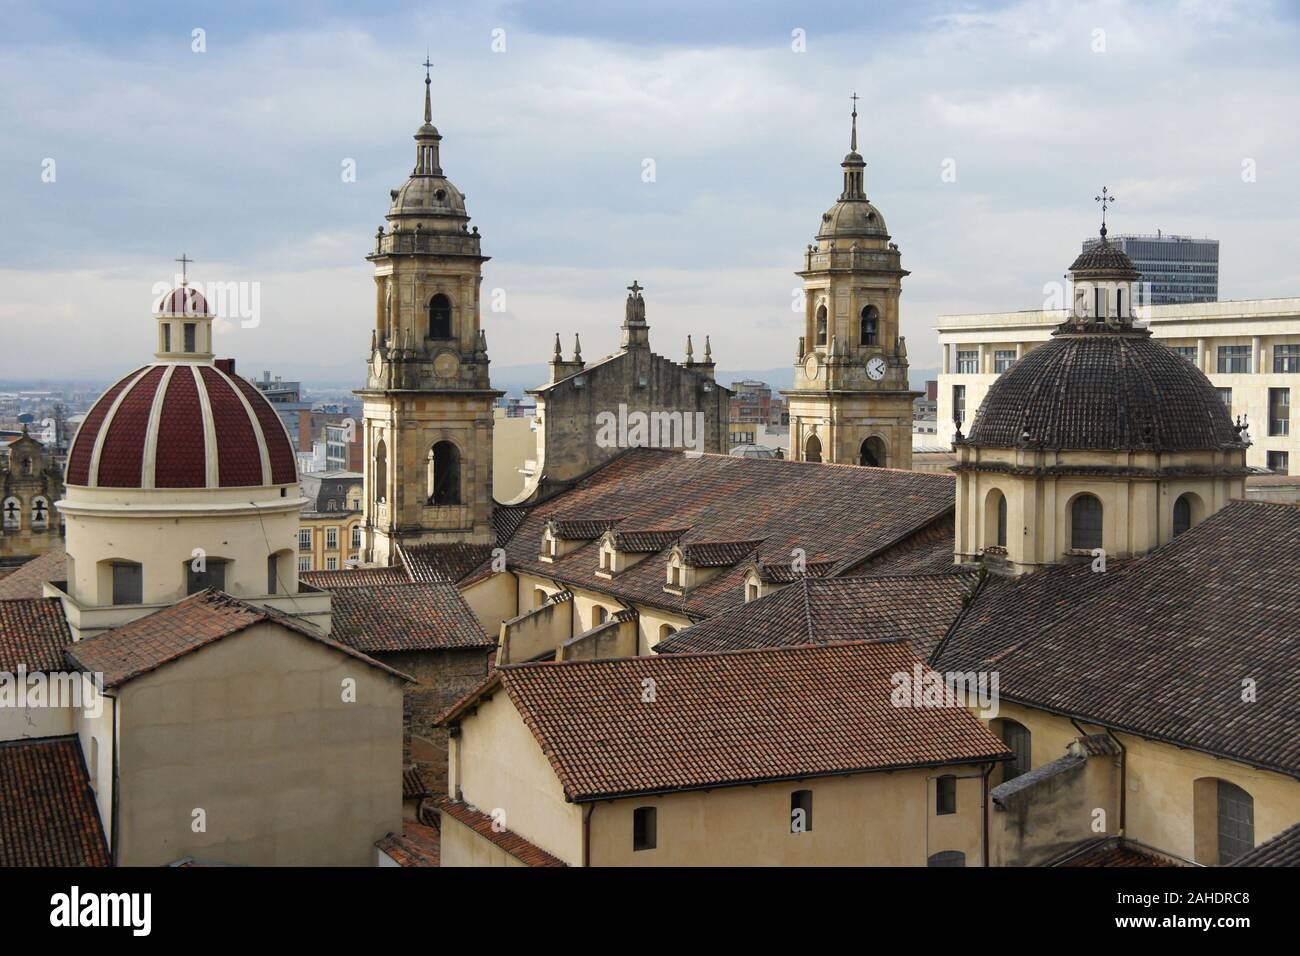 Rooftops, domes, and towers of historic buildings in La Candelaria, Bogota, Colombia, with La Catedral Primada and Capilla Sagrario in foreground Stock Photo